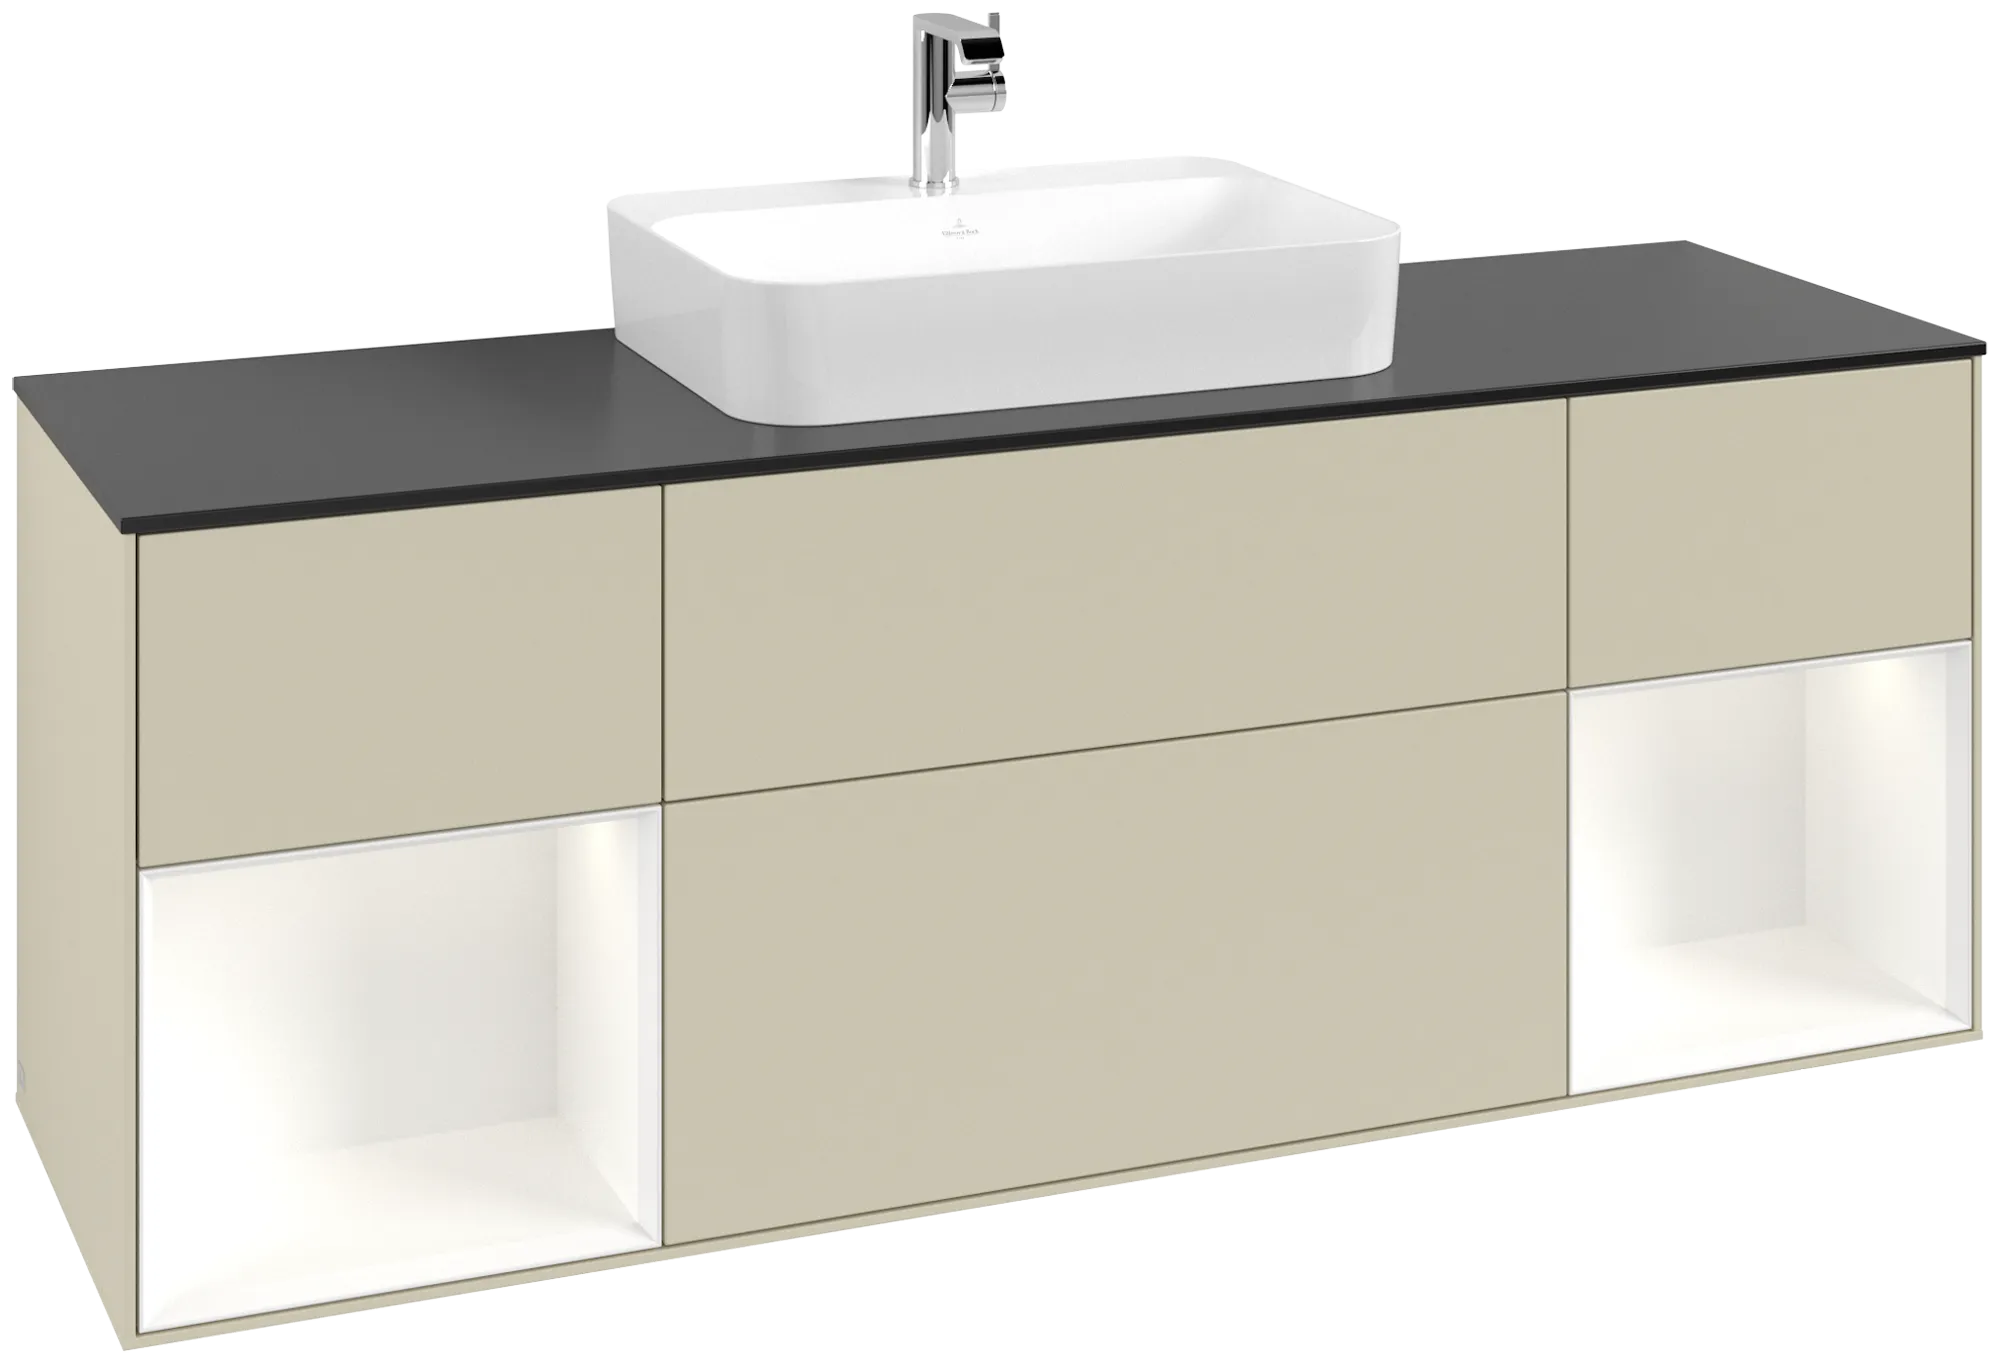 Picture of VILLEROY BOCH Finion Vanity unit, with lighting, 4 pull-out compartments, 1600 x 603 x 501 mm, Silk Grey Matt Lacquer / White Matt Lacquer / Glass Black Matt #G452MTHJ